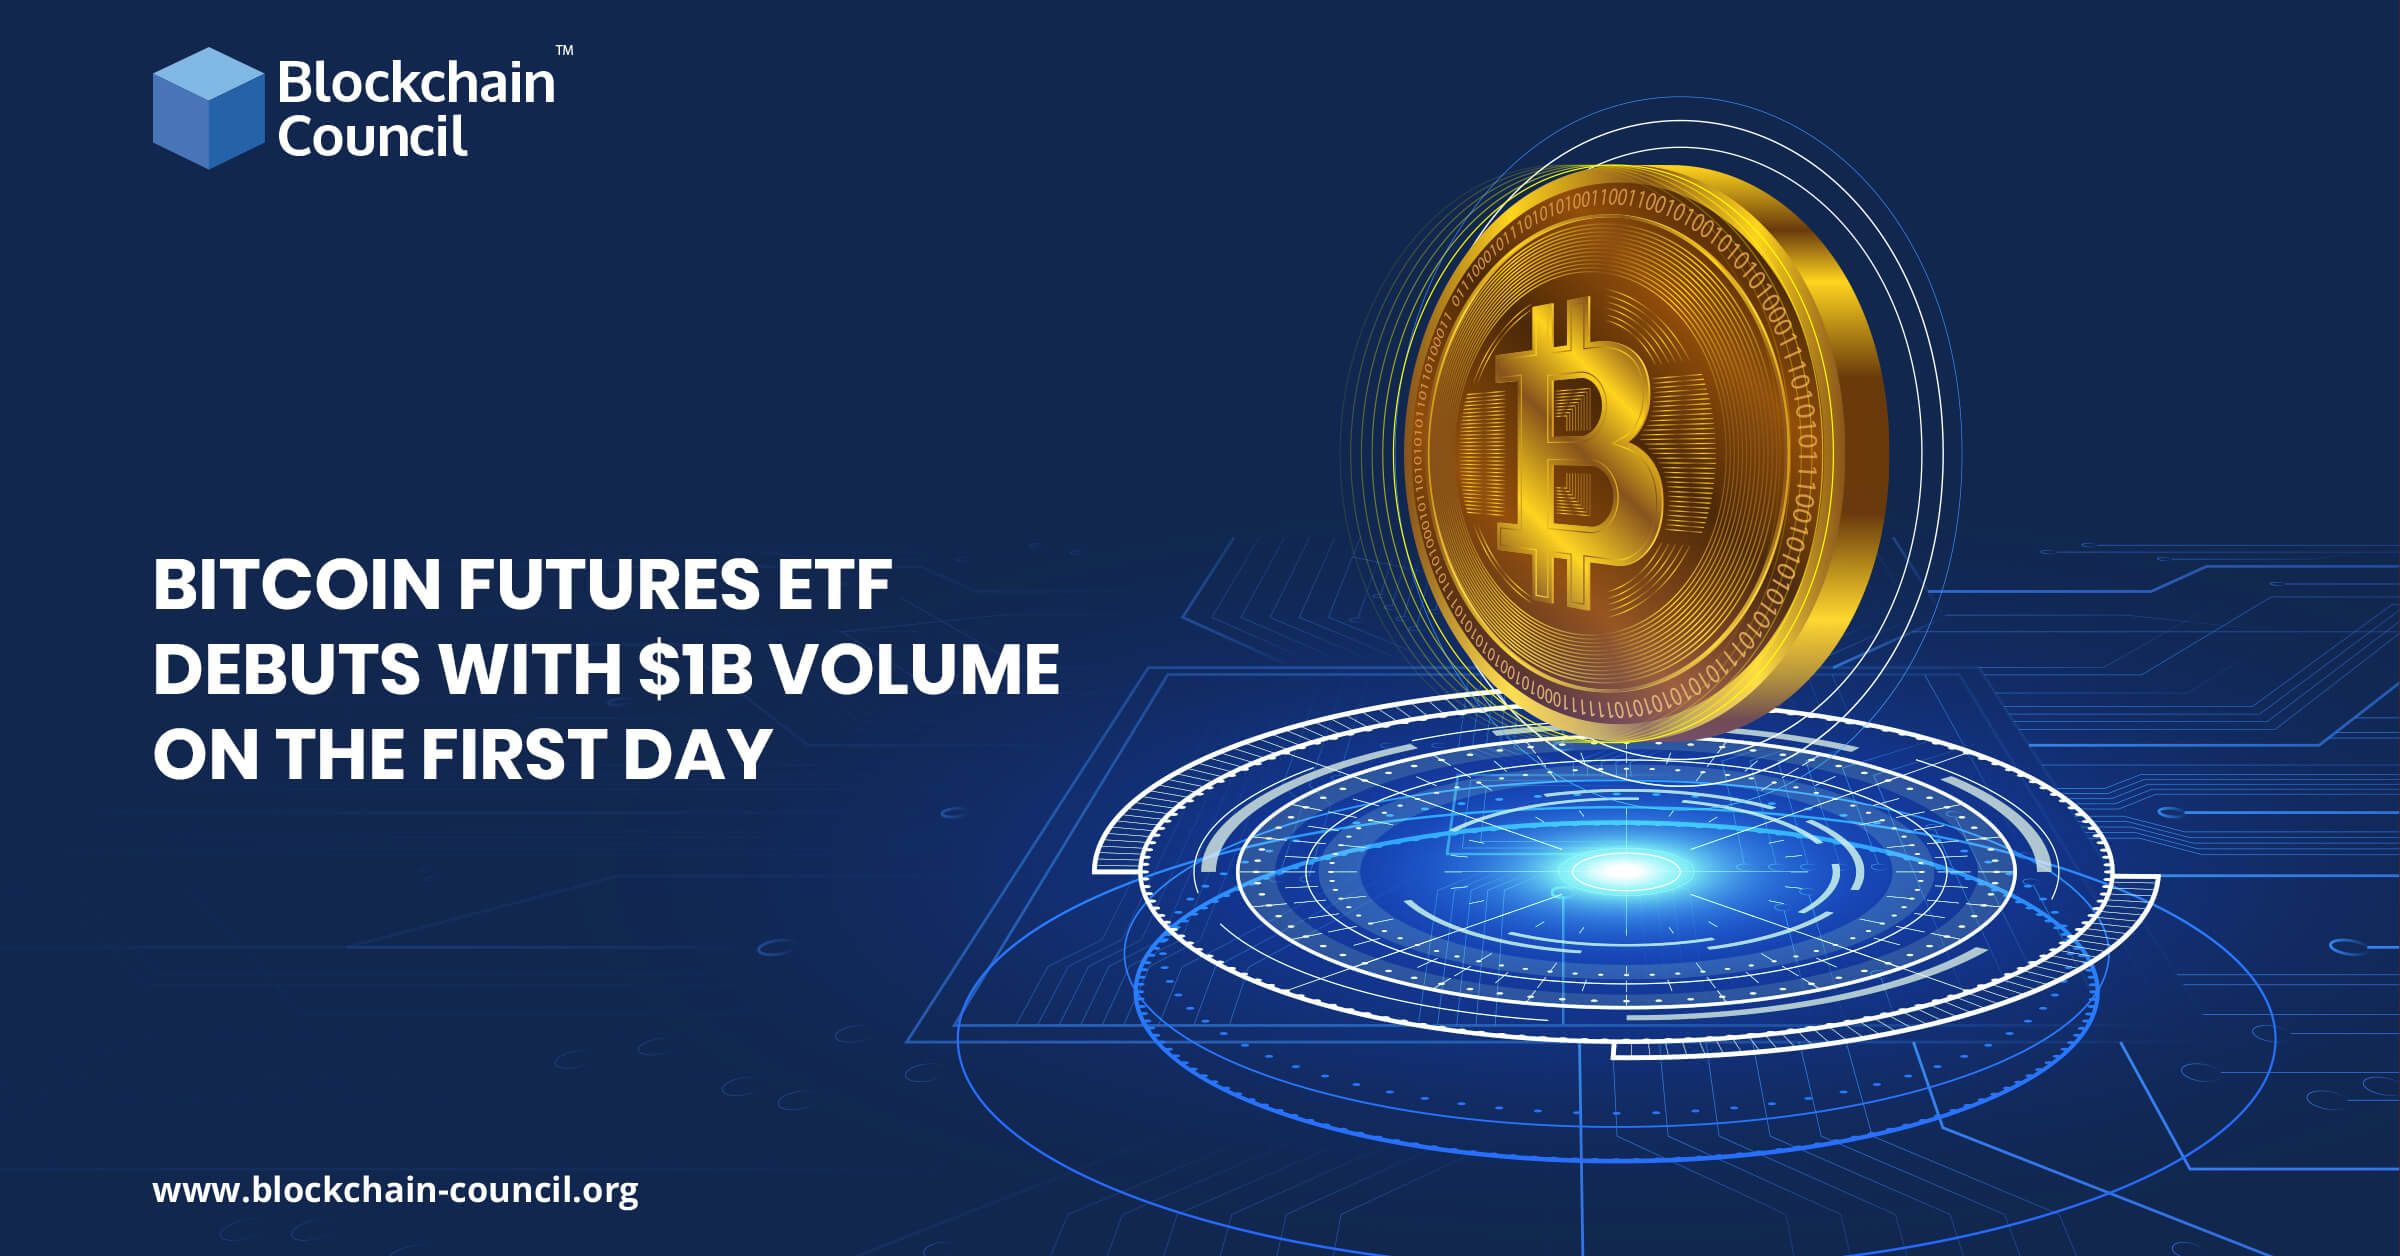 Bitcoin futures ETF Debuts With $1B Volume On The First Day